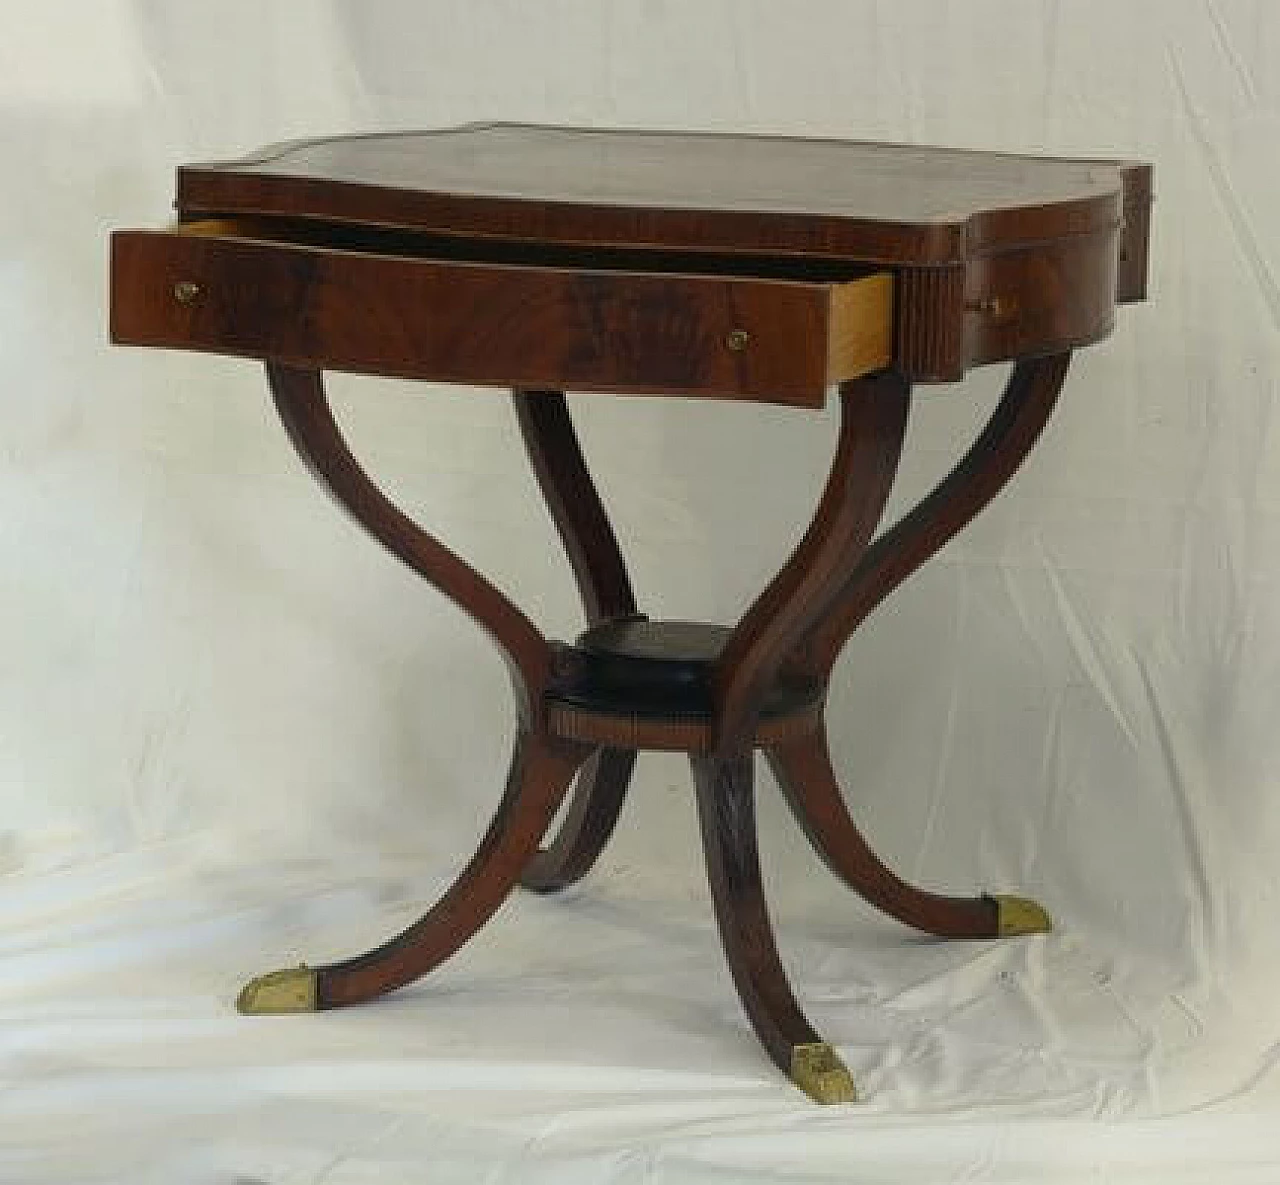 Mahogany feather game table with bronze feet and knobs, 1920s 20